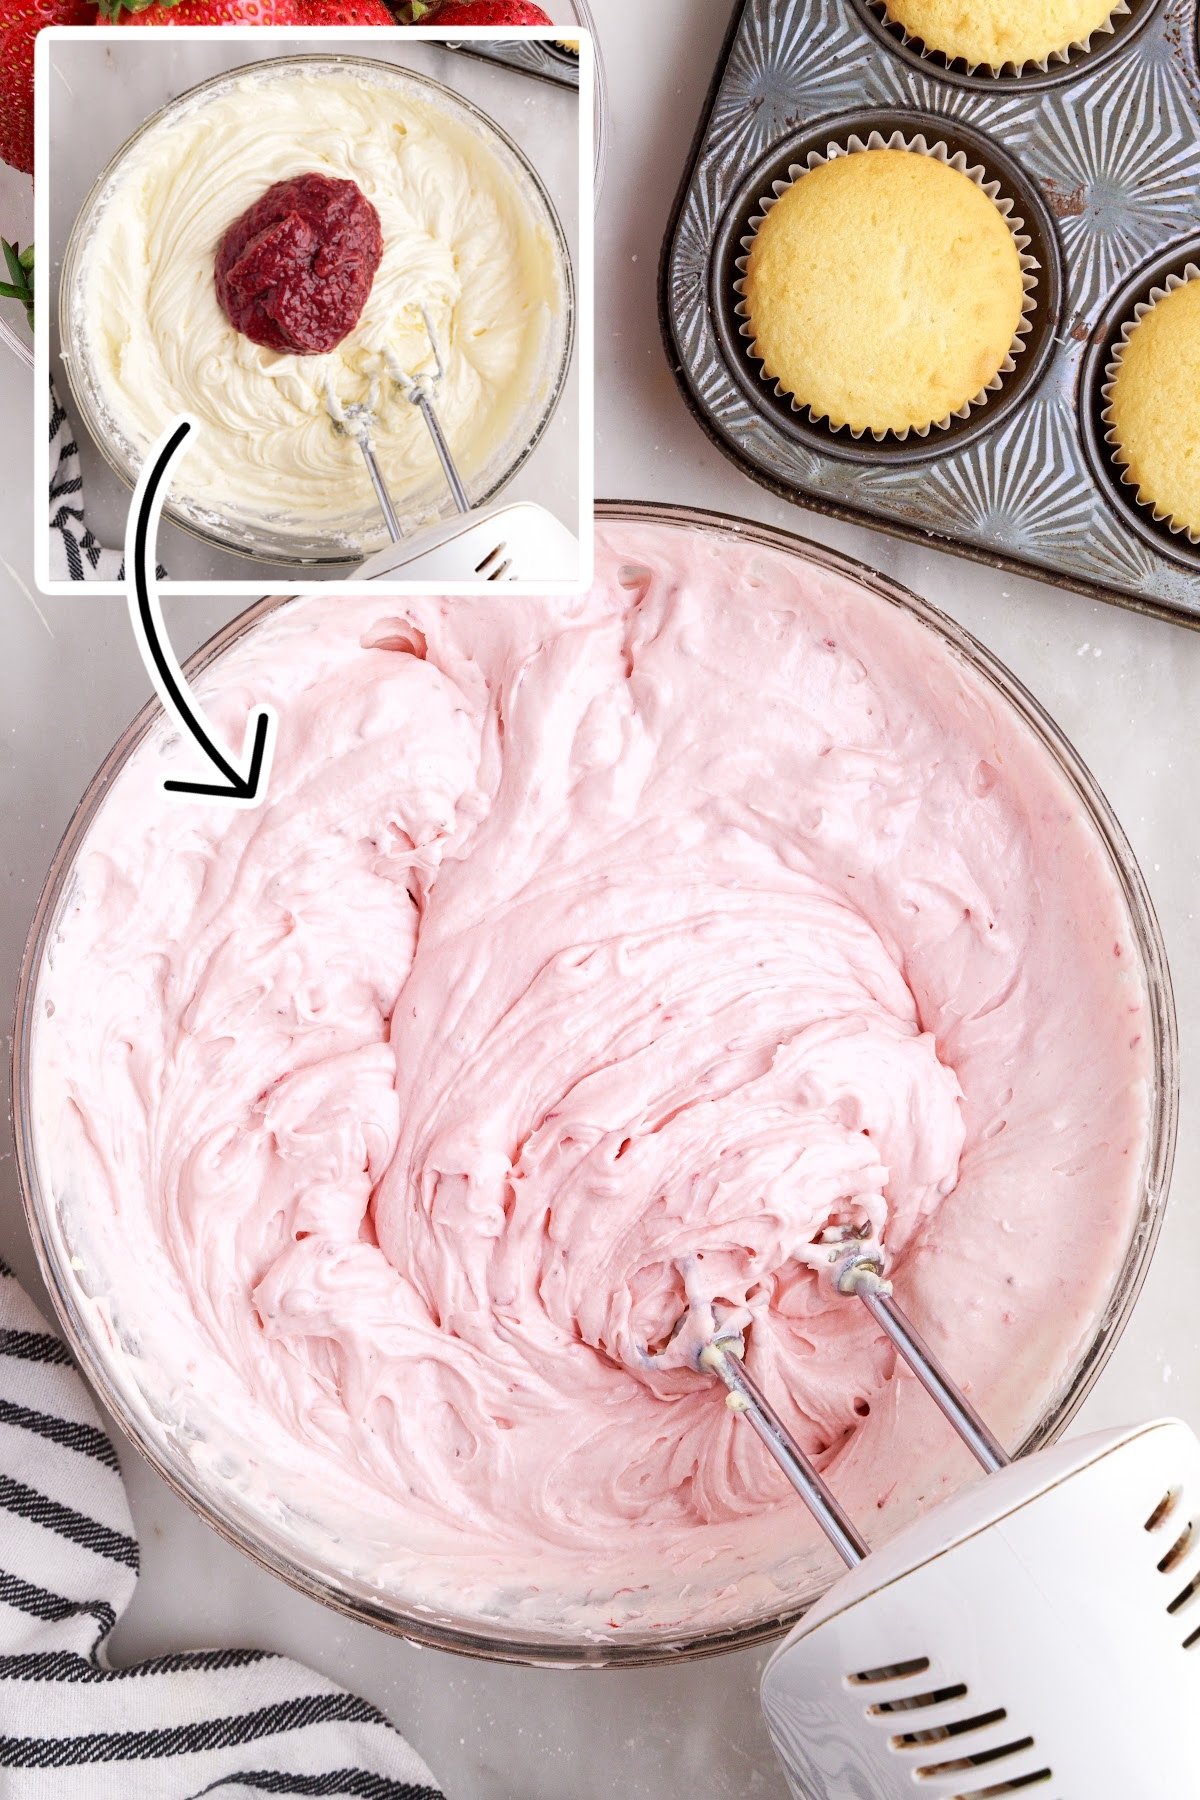 Strawberry puree added to cream cheese frosting and beaten in to make strawberry cream cheese frosting, with hand mixer.